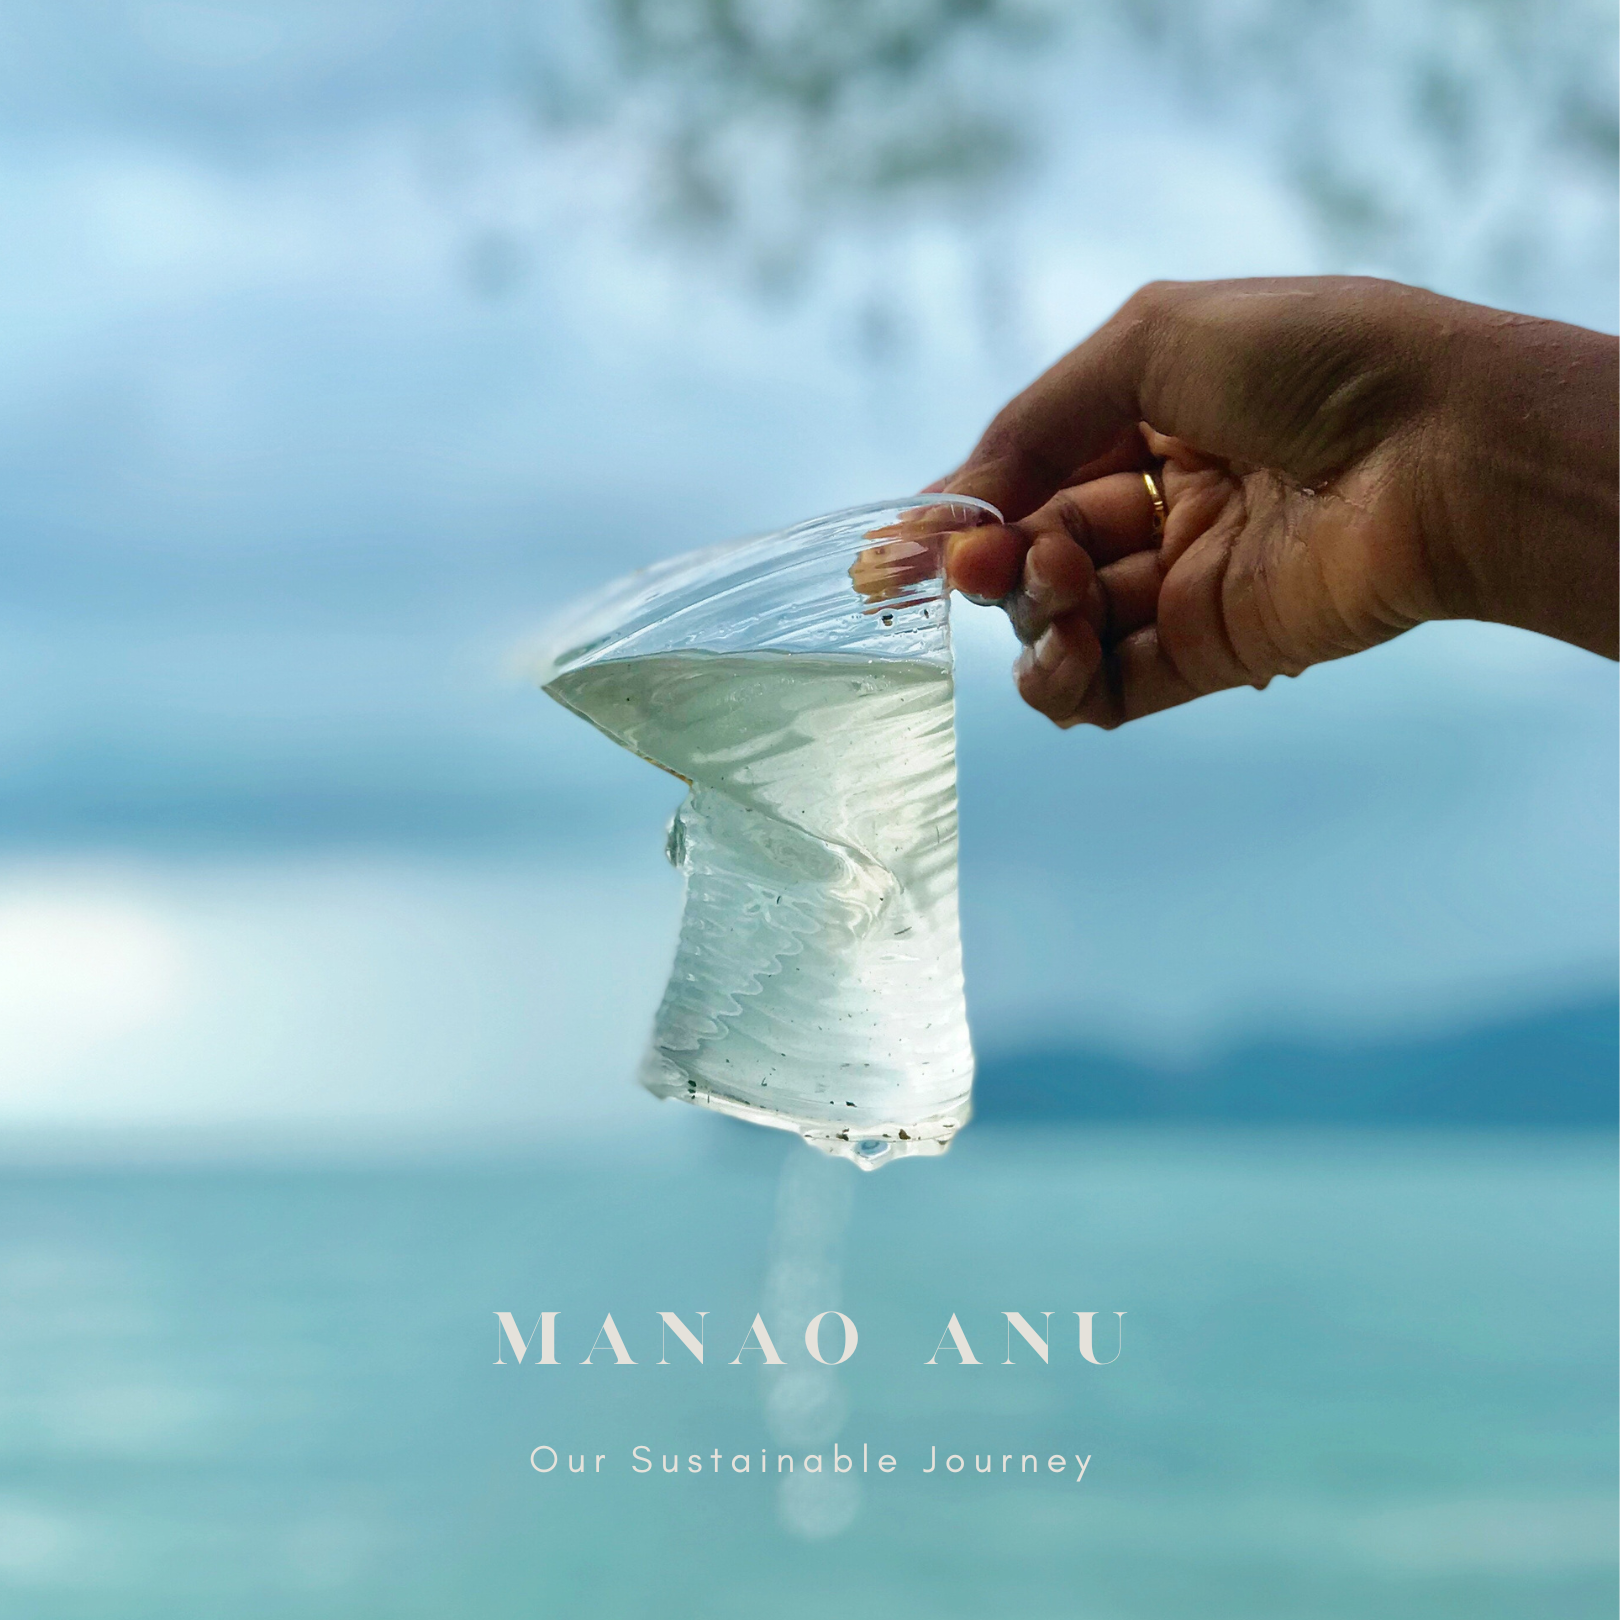 Manao Anu - Our sustainable Journey. How We Can All Become Better.